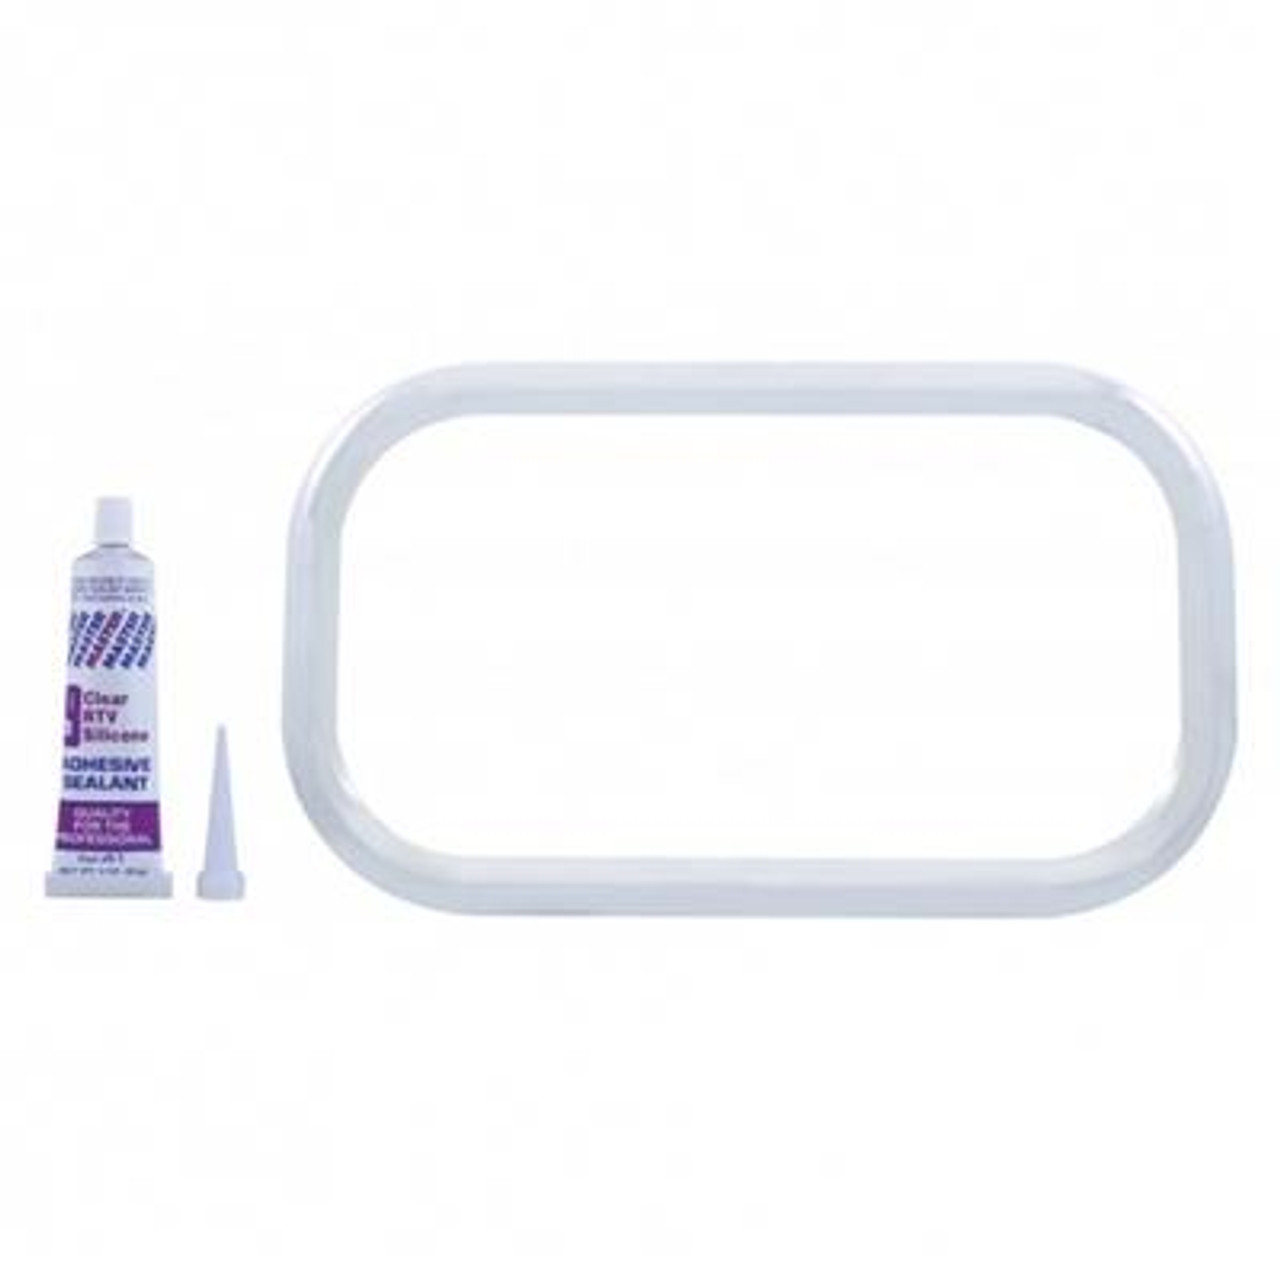 Freightliner Stainless Curved View Window Trim With Sealant Adhesive